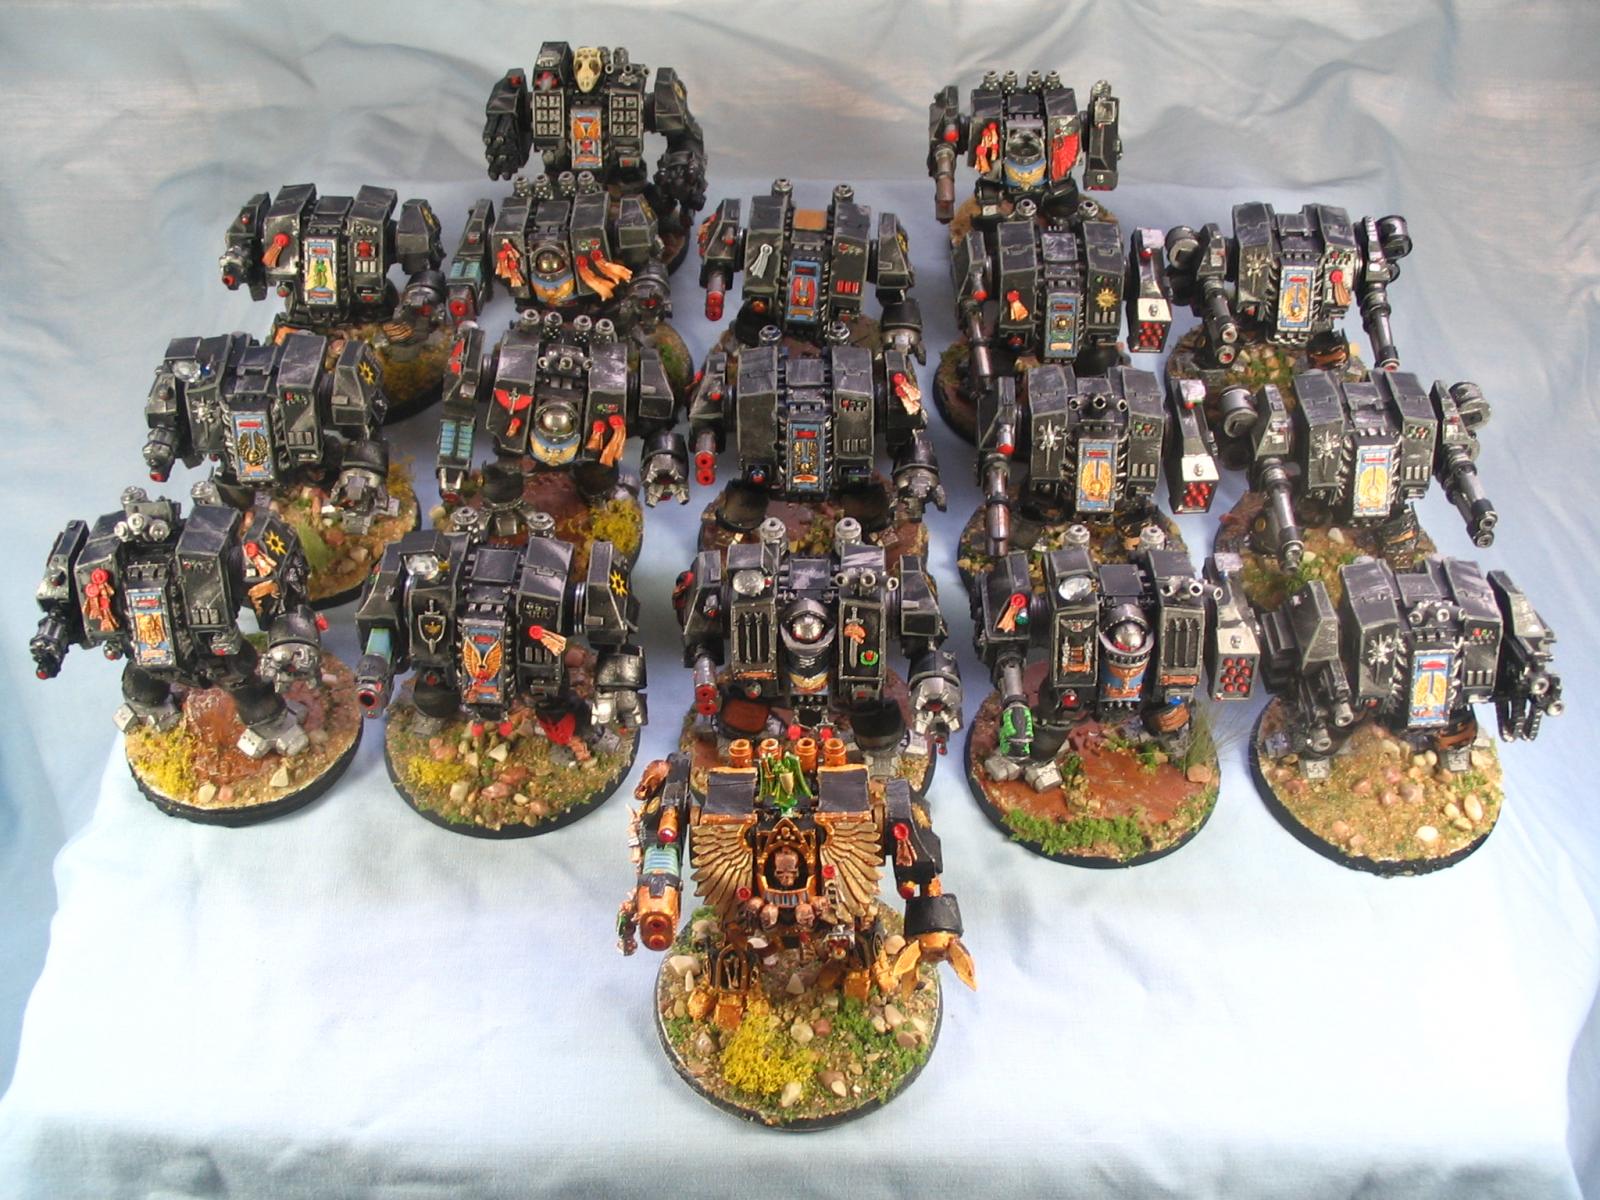 Most of my Dreadnoughts